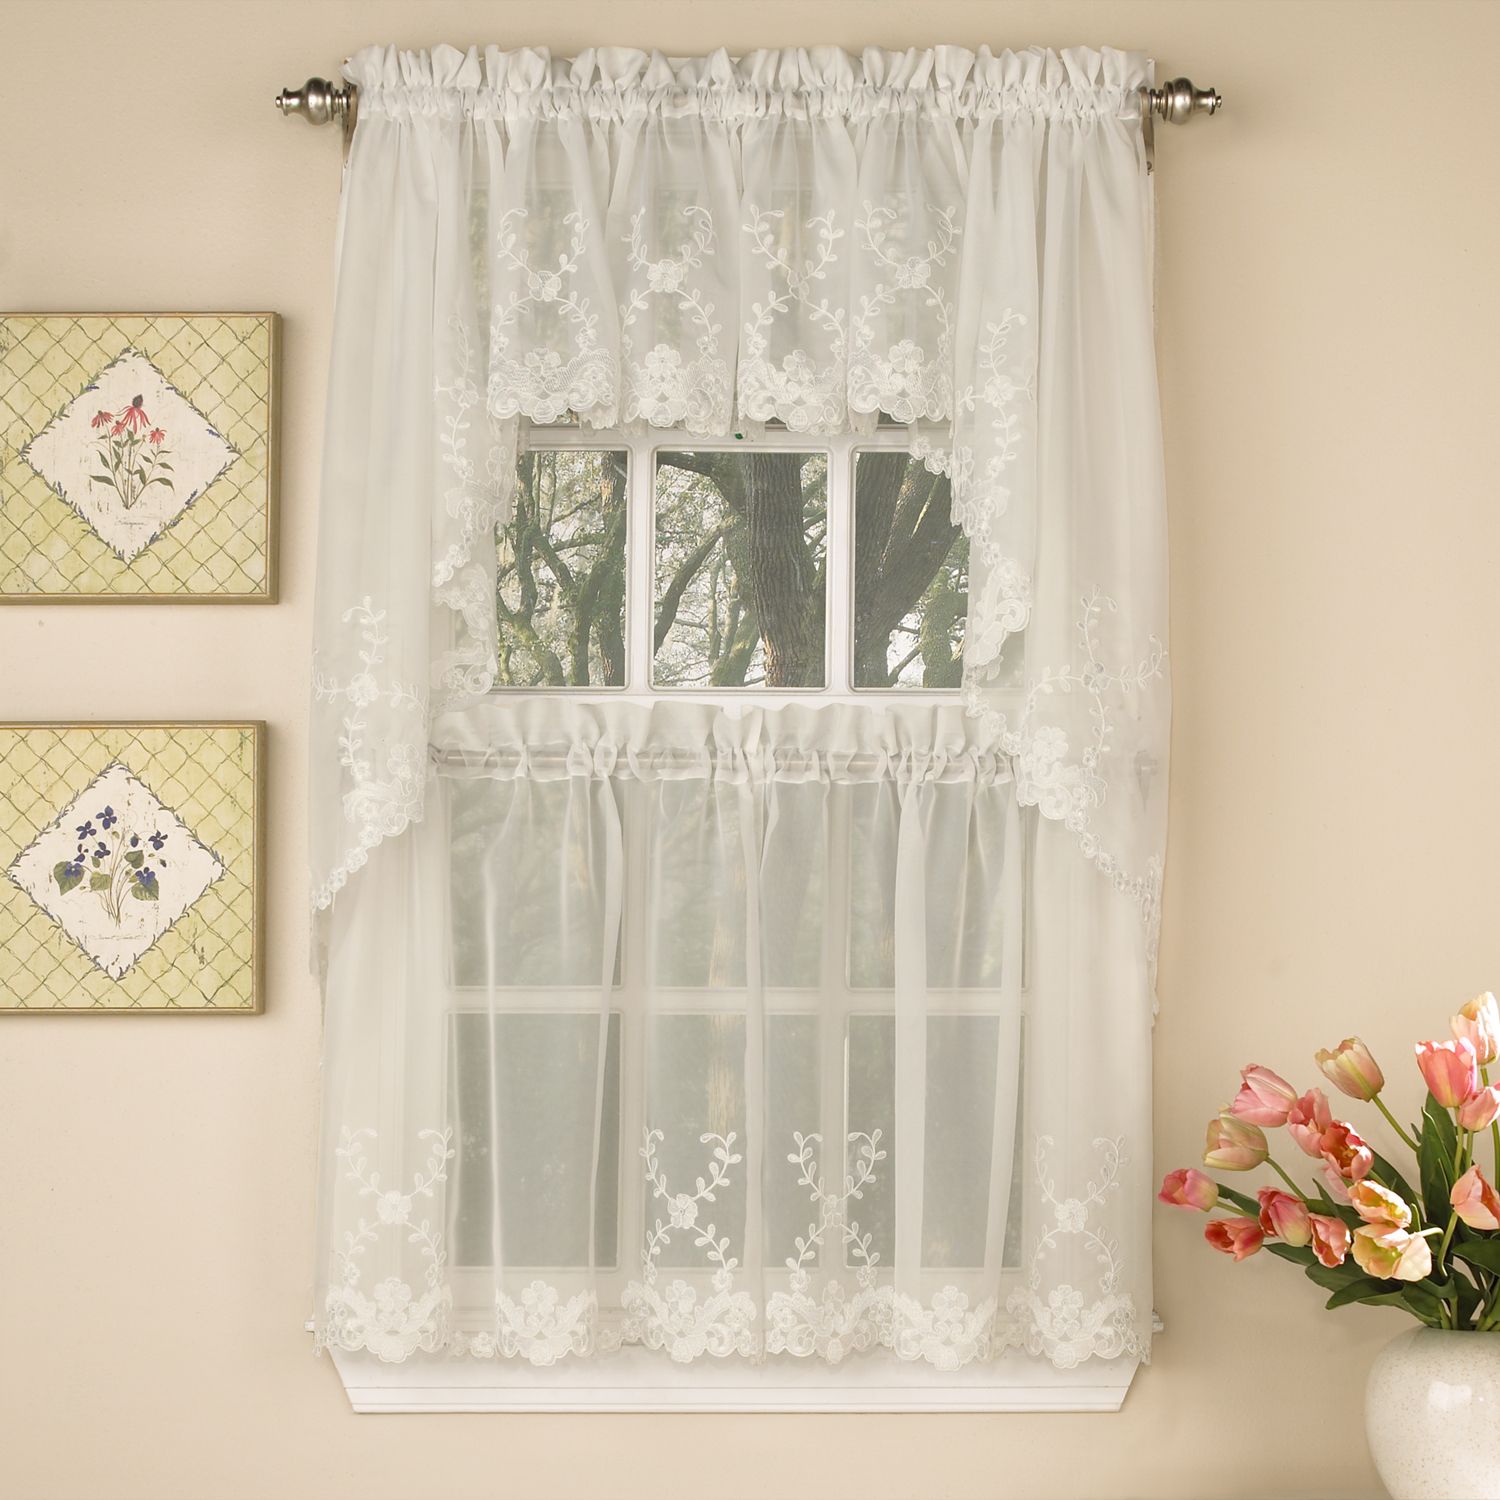 Details About Laurel Leaf Sheer Voile Embroidered Ivory Kitchen Curtains  Tier, Valance Or Swag Intended For Kitchen Curtain Tiers (View 2 of 20)